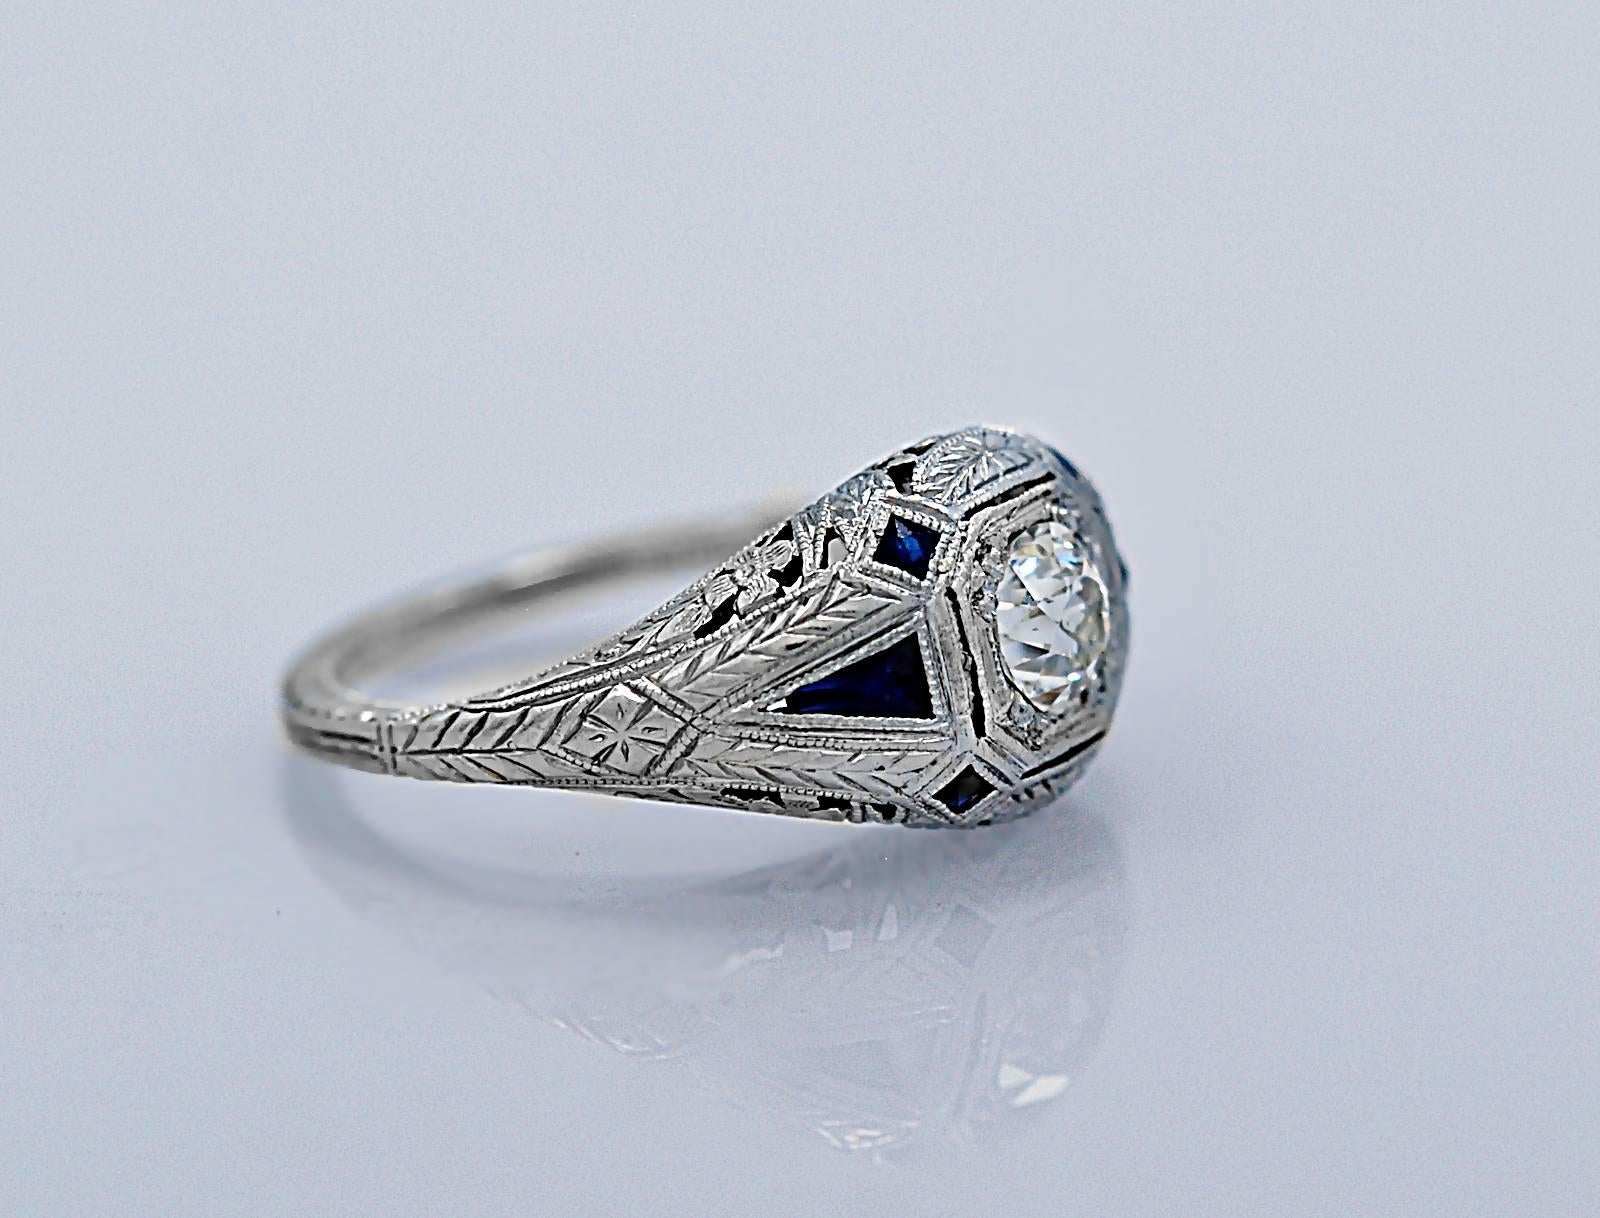 A highly distinctive Art Deco engagement ring featuring a .50ct. apx. European cut diamond with VS2 clarity and H-I color. In addition, there are .40ct. apx. T.W. of blue synthetic sapphires in triangular and square cut baguette shapes. Furthermore,